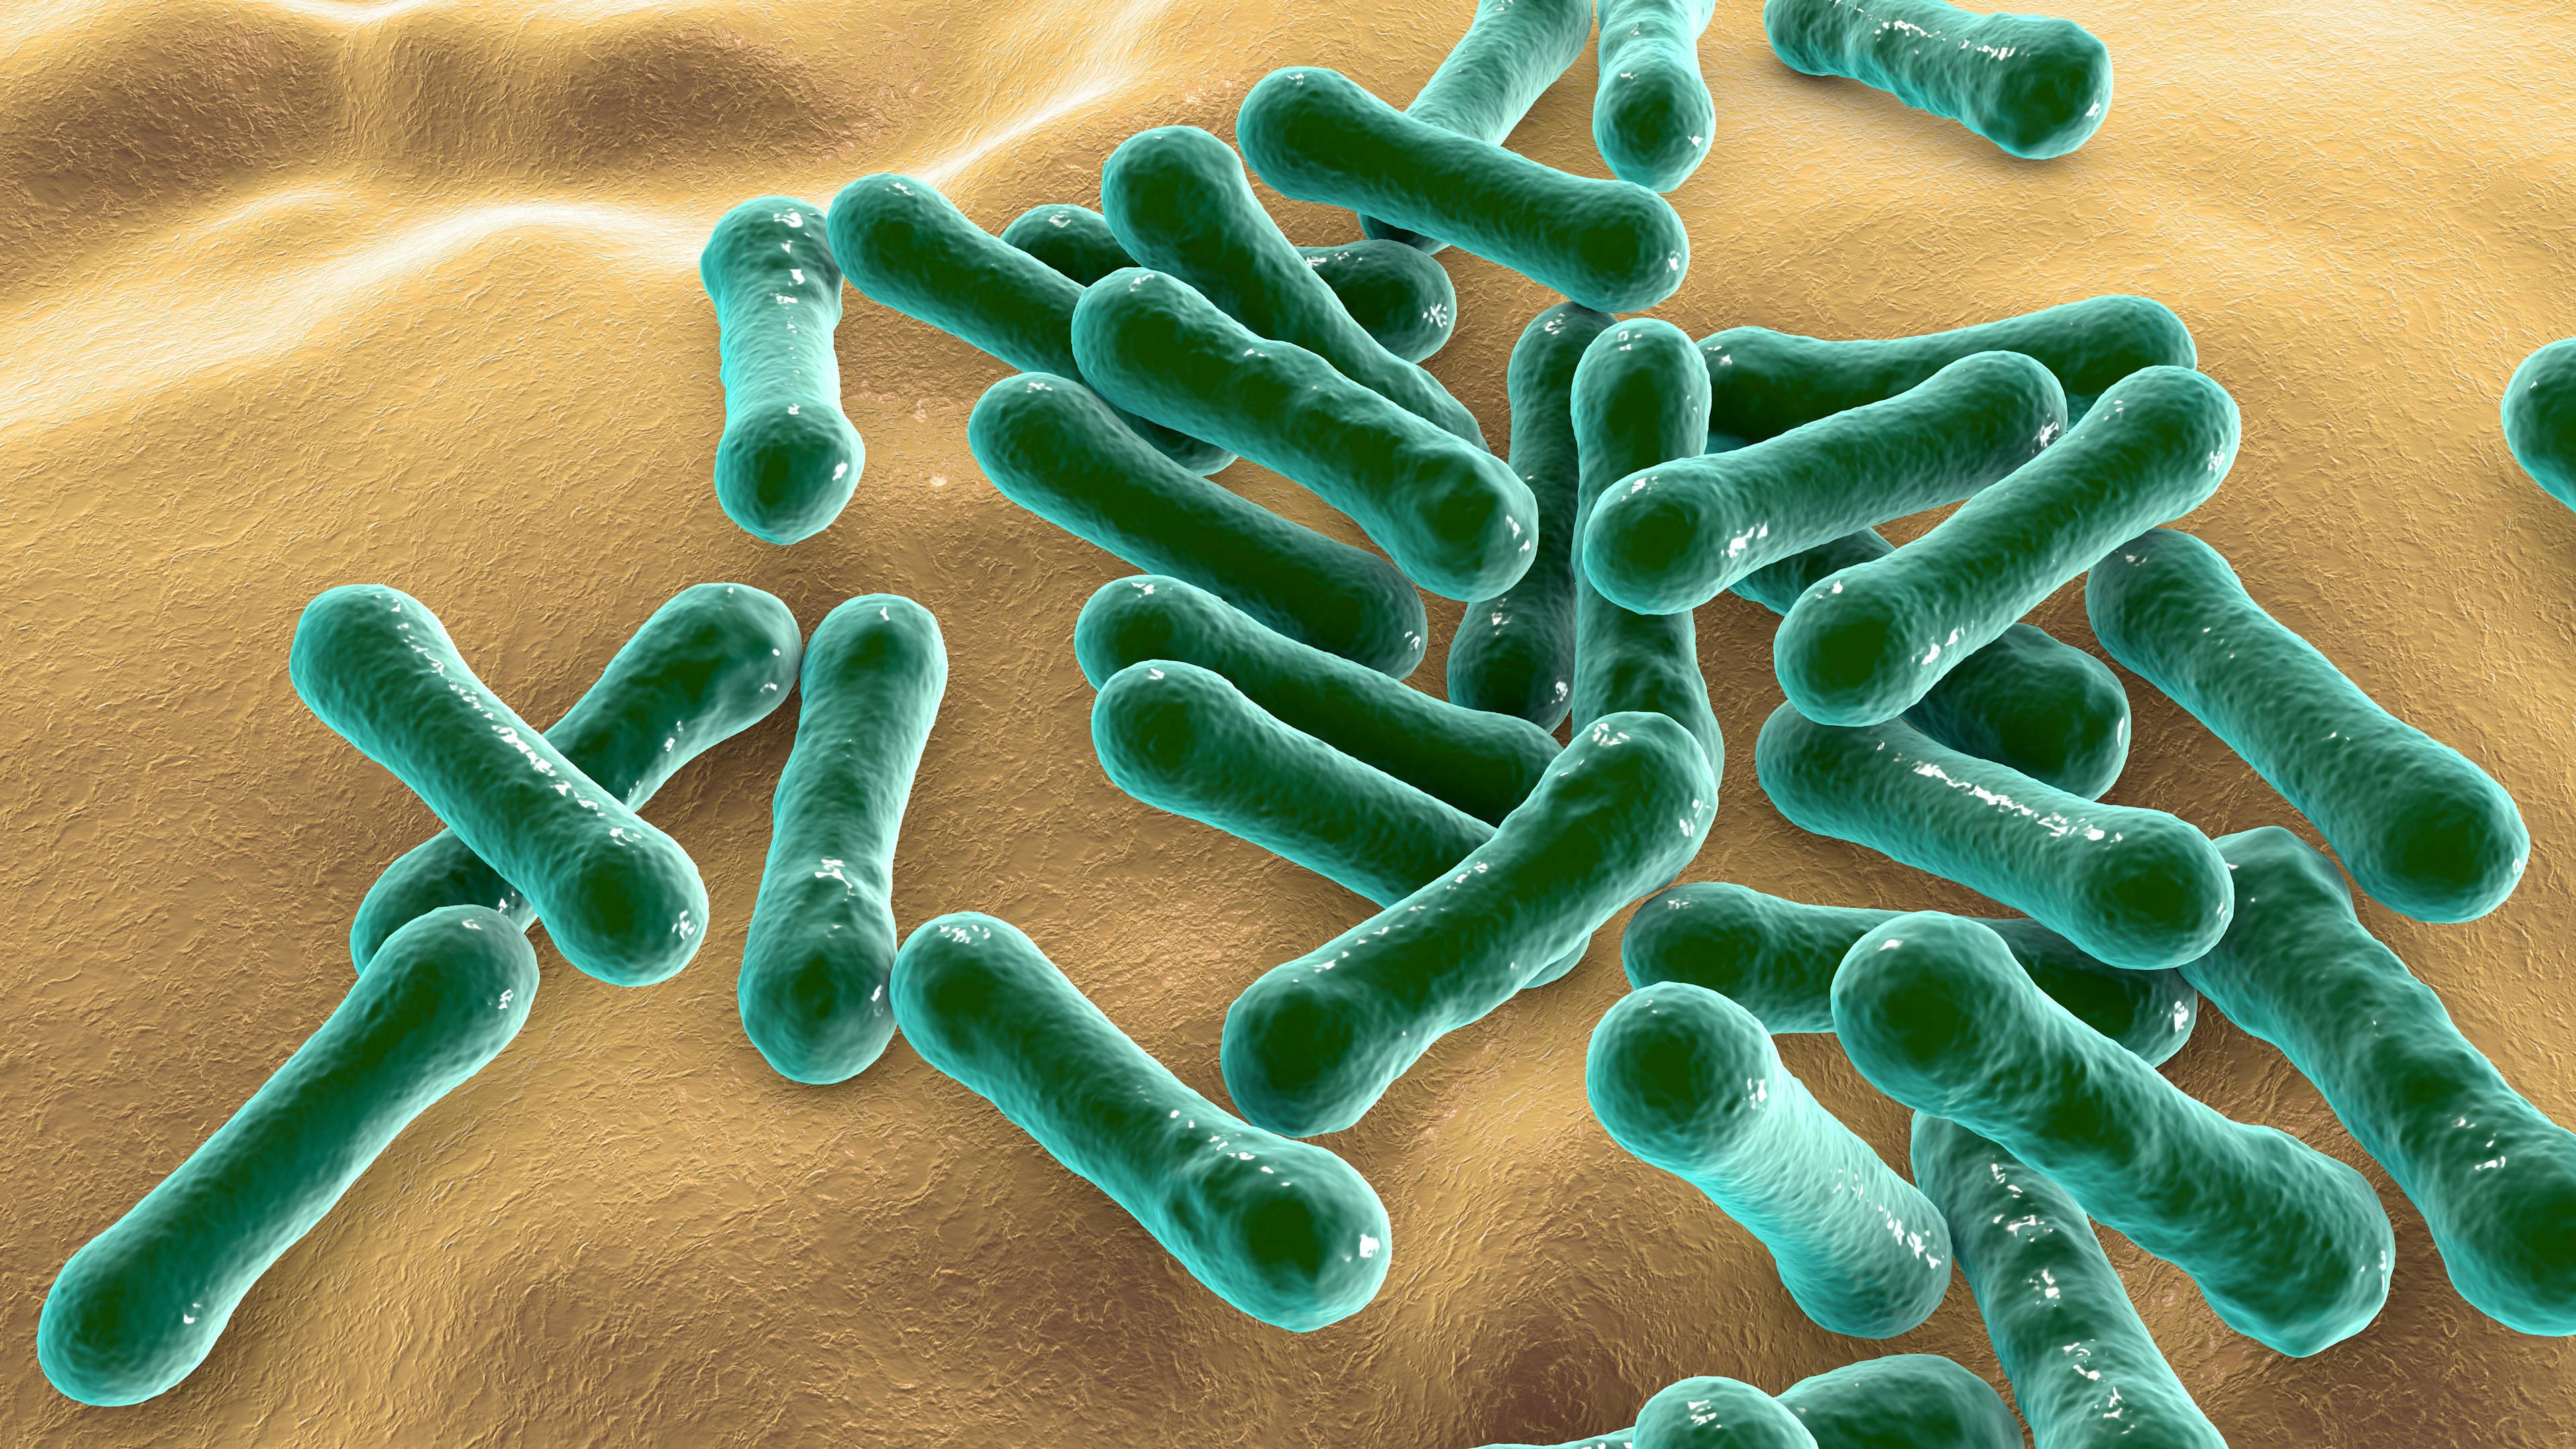 C difficile is the primary cause of hospital-acquired infection, and it can cause diarrhea and colitis. Image Credit: © Dr_Microbe - stock.adobe.com